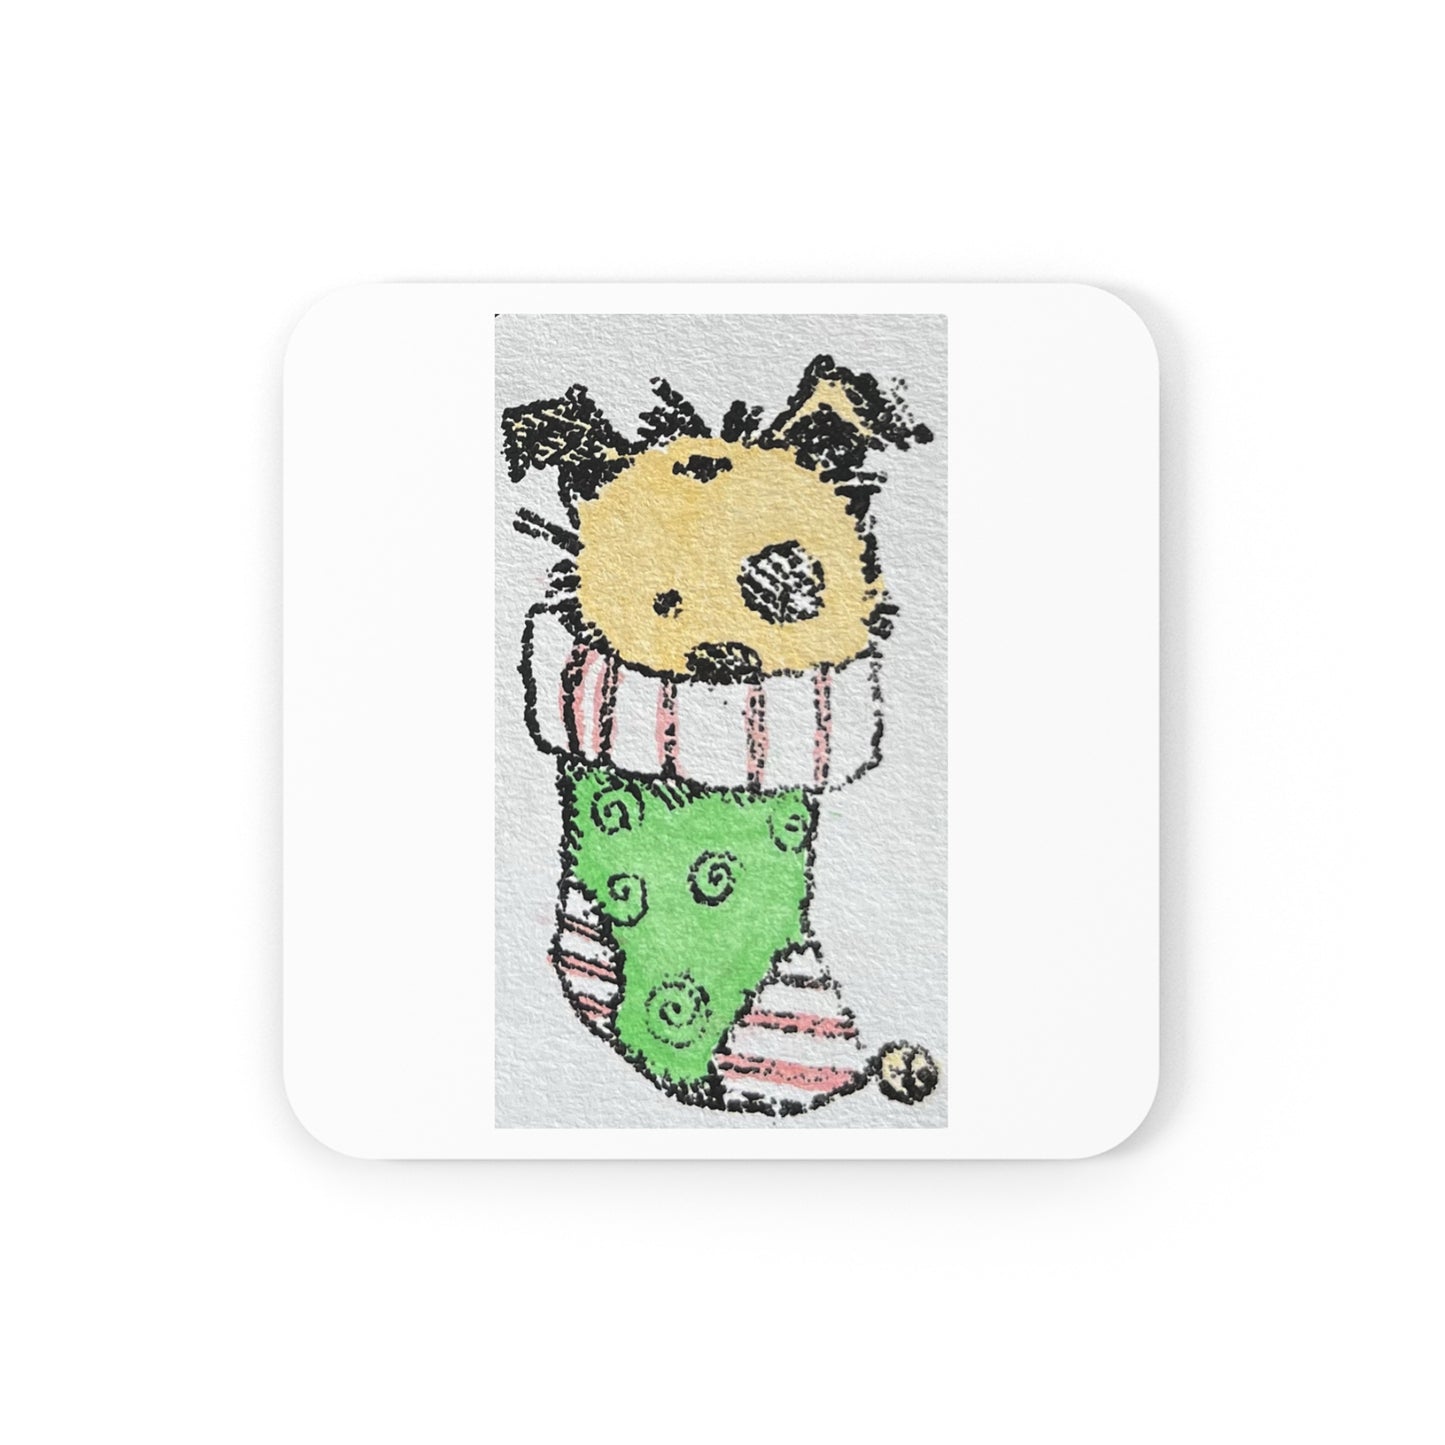 Paws and Cheers: Festive Dog-Themed Holiday Coaster Set